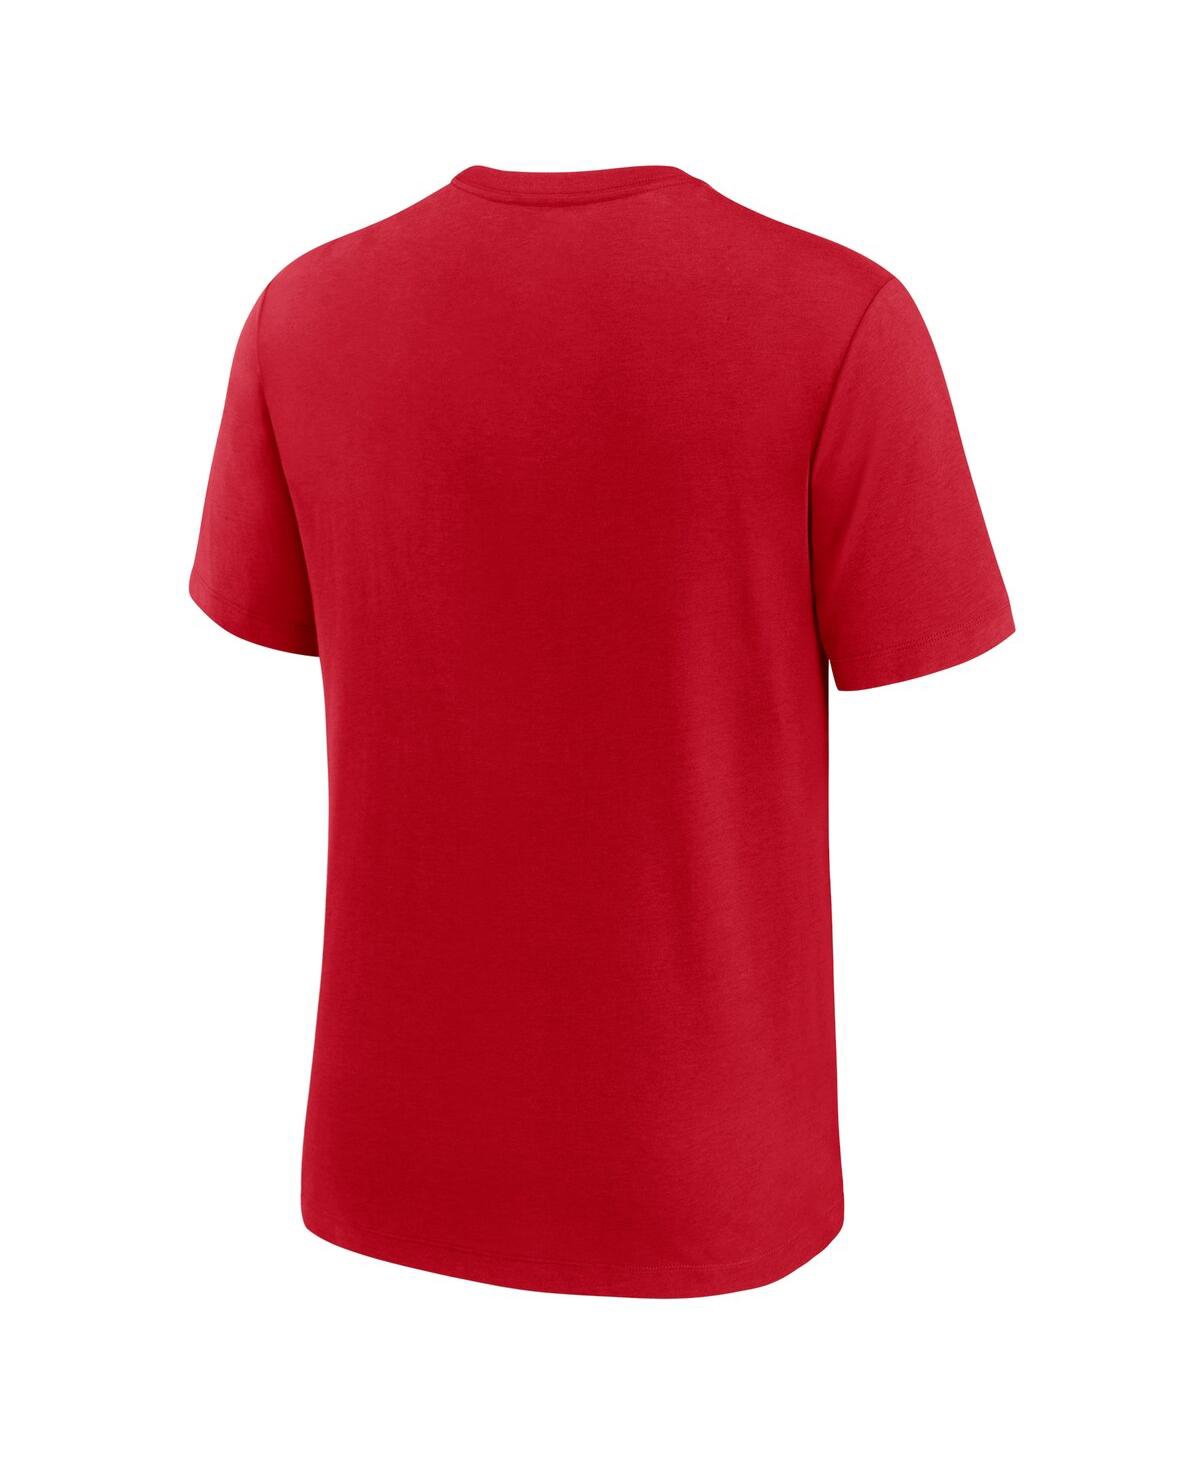 Shop Nike Men's  Red California Angels Cooperstownâ Collection Rewind Retro Tri-blend T-shirt